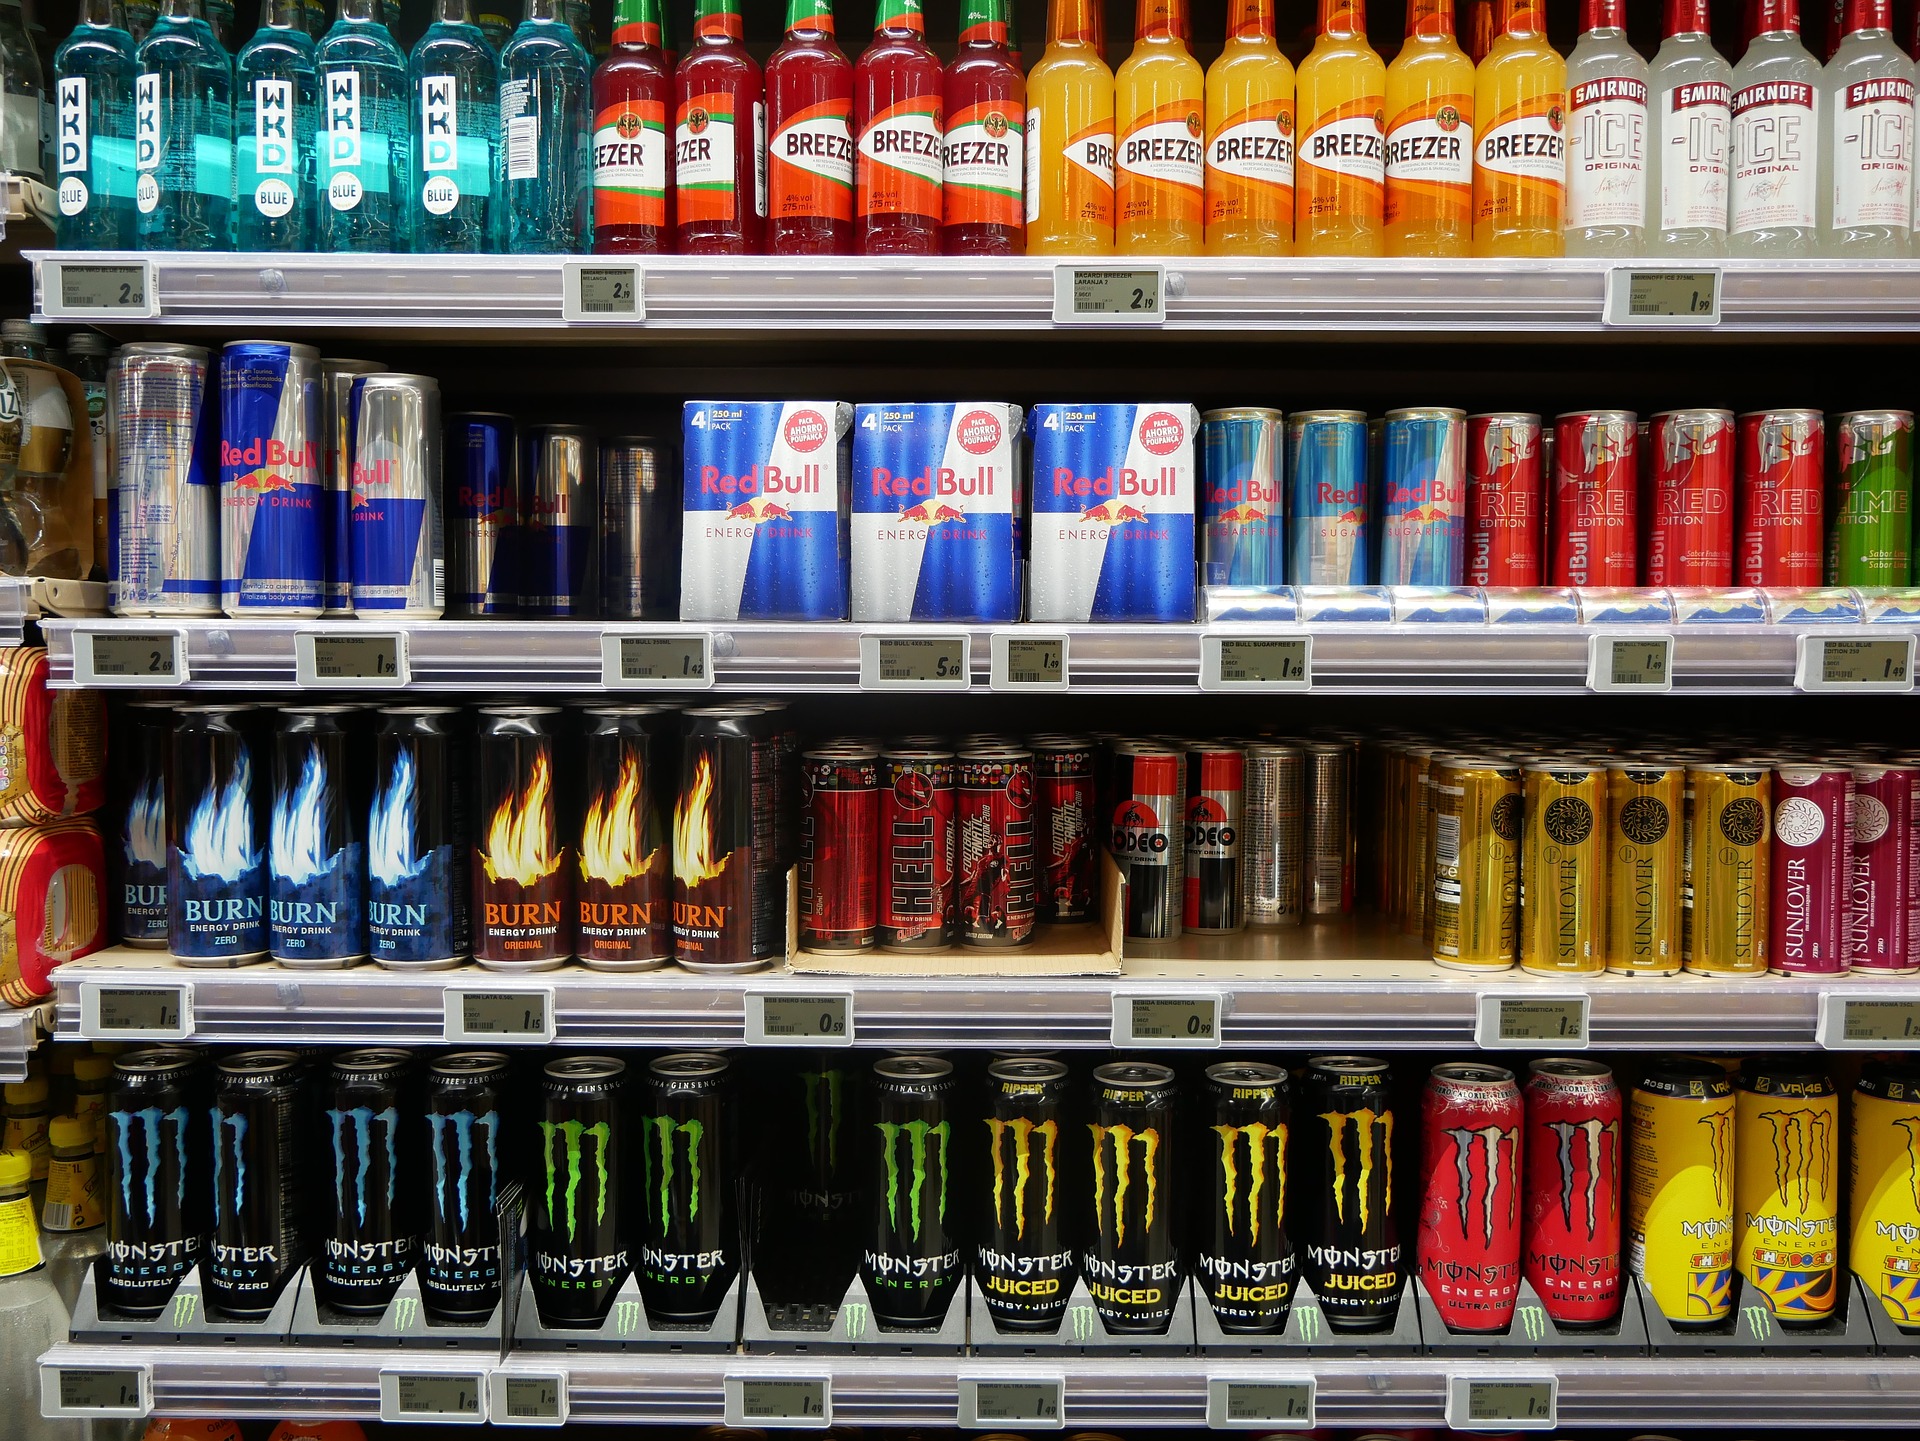 Negative effects of energy drinks